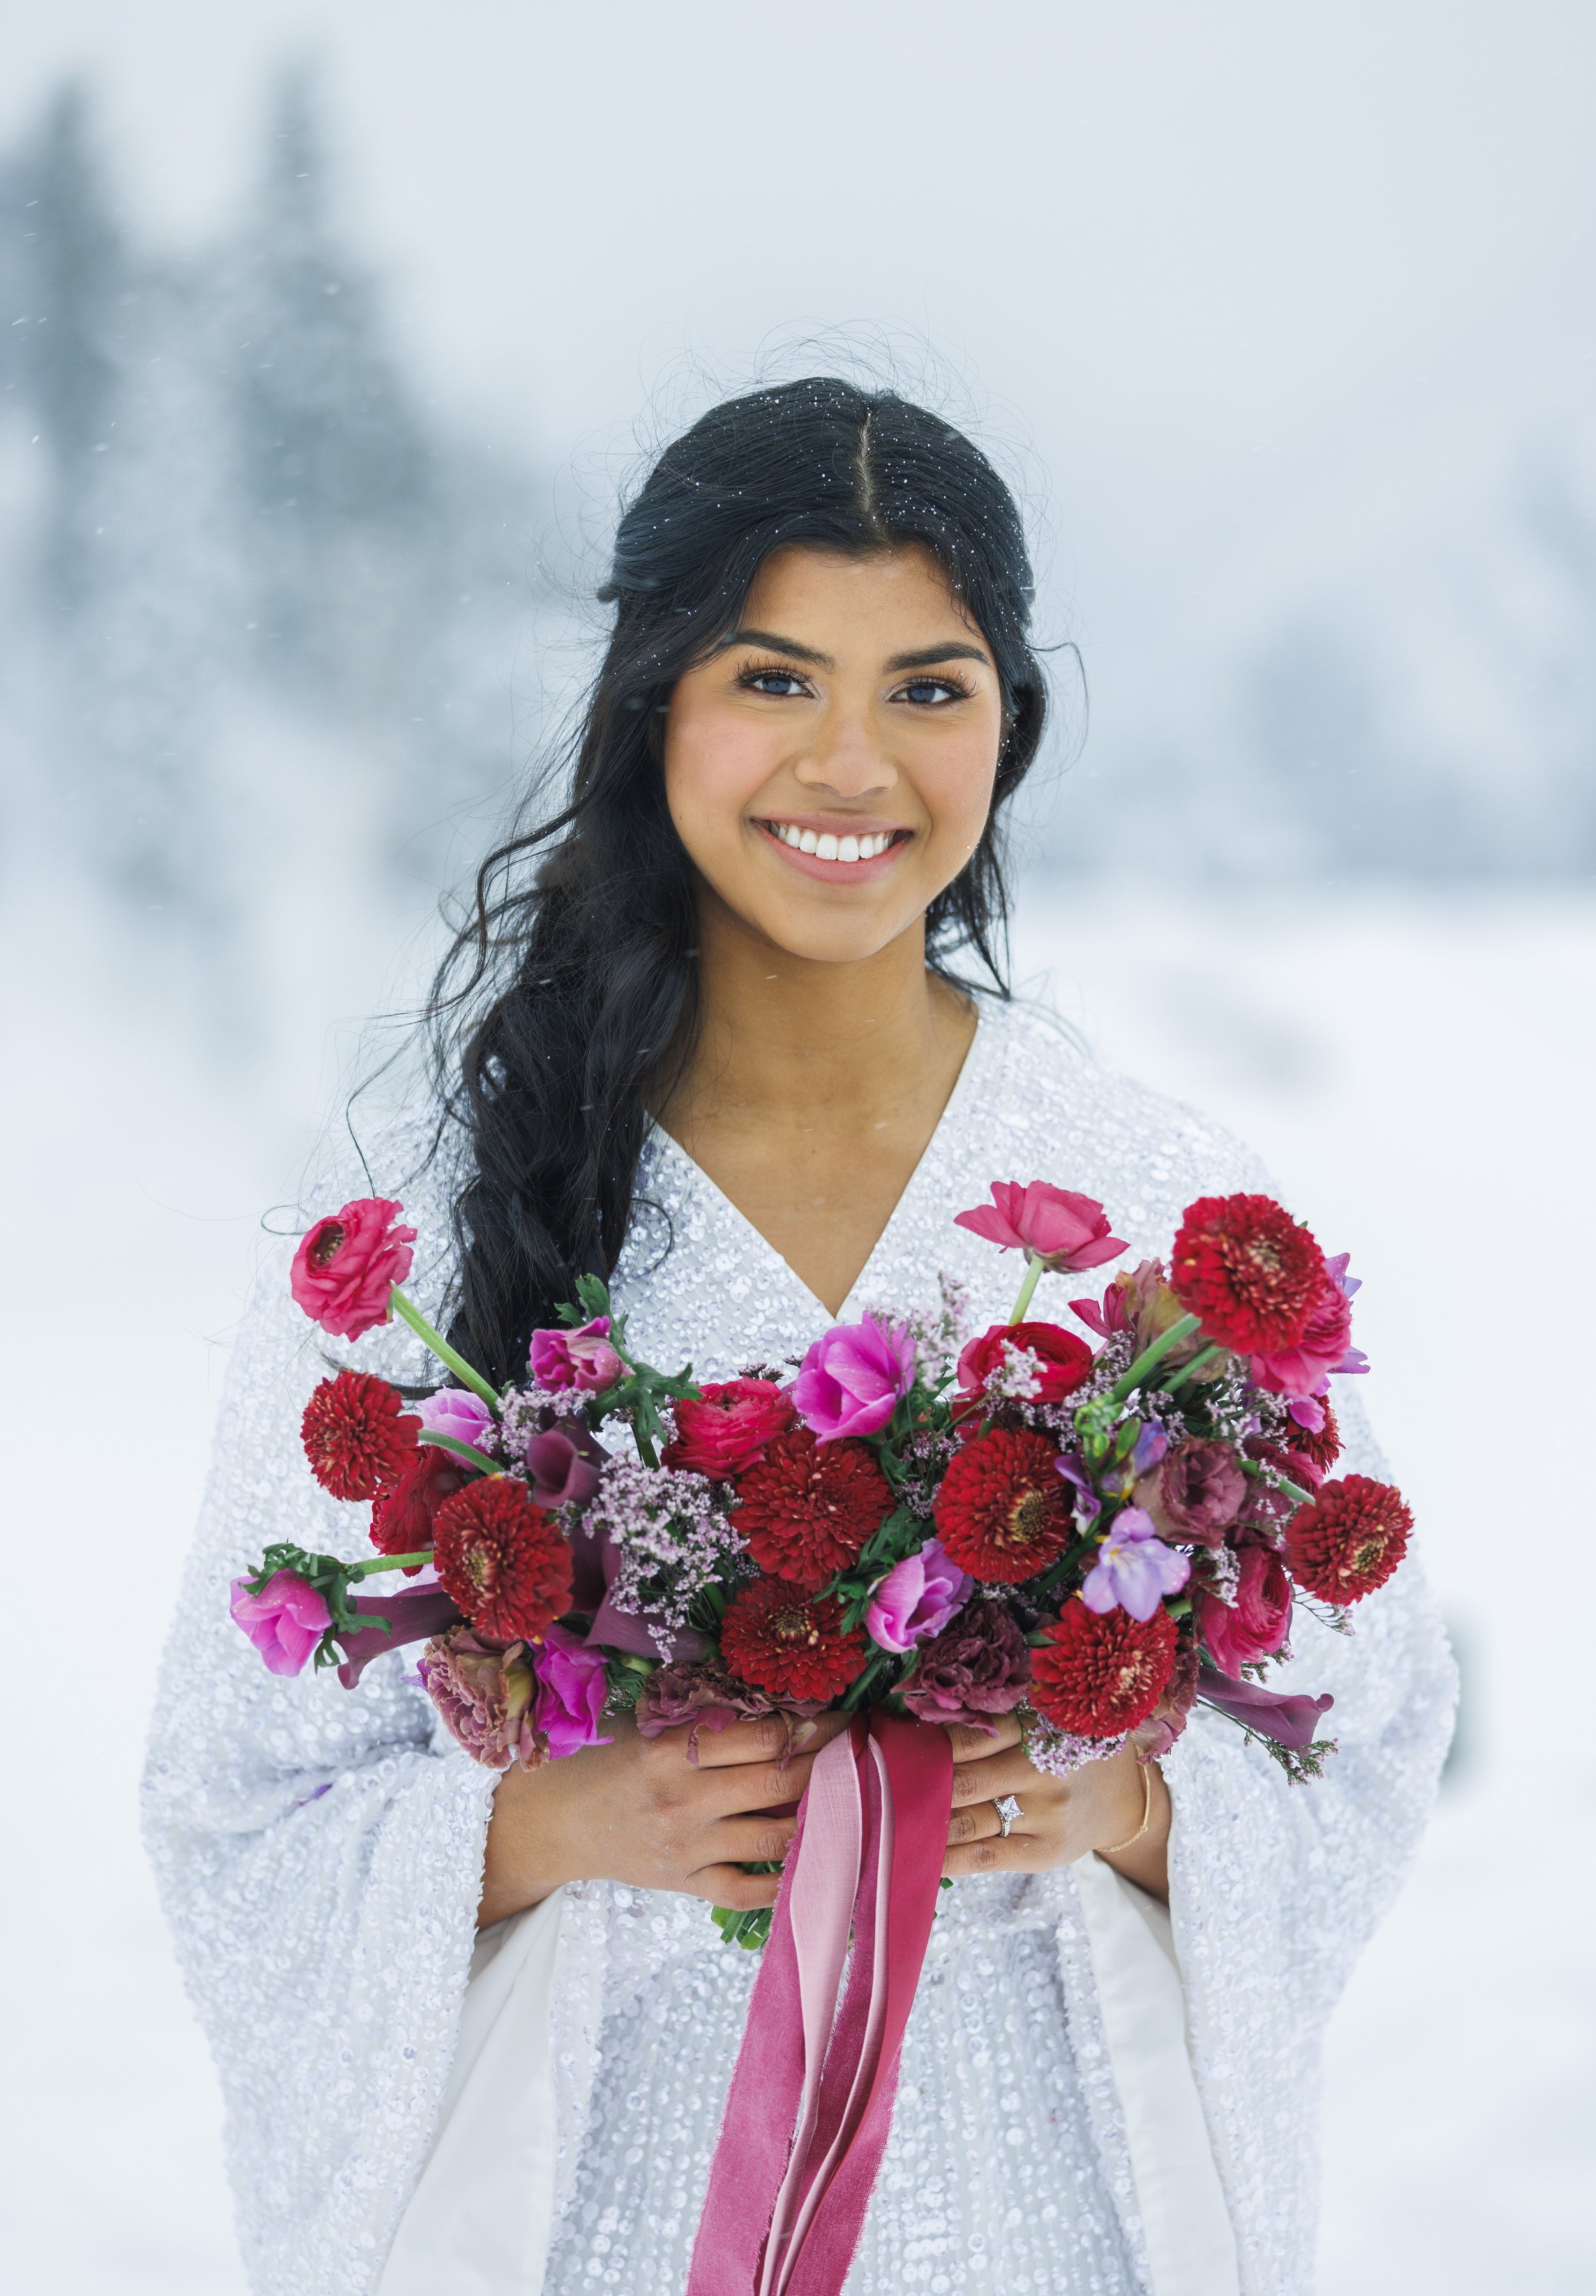  Beautiful snow bride with a pink and red bouquet and glitter gown by Savanna Richardson Photography. winter inspo #SavannaRichardsonPhotography #SavannaRichardsonBridals #WinterBridals #WinterWedding #TibbleForkBridals #UtahBridals #MountainBridals 